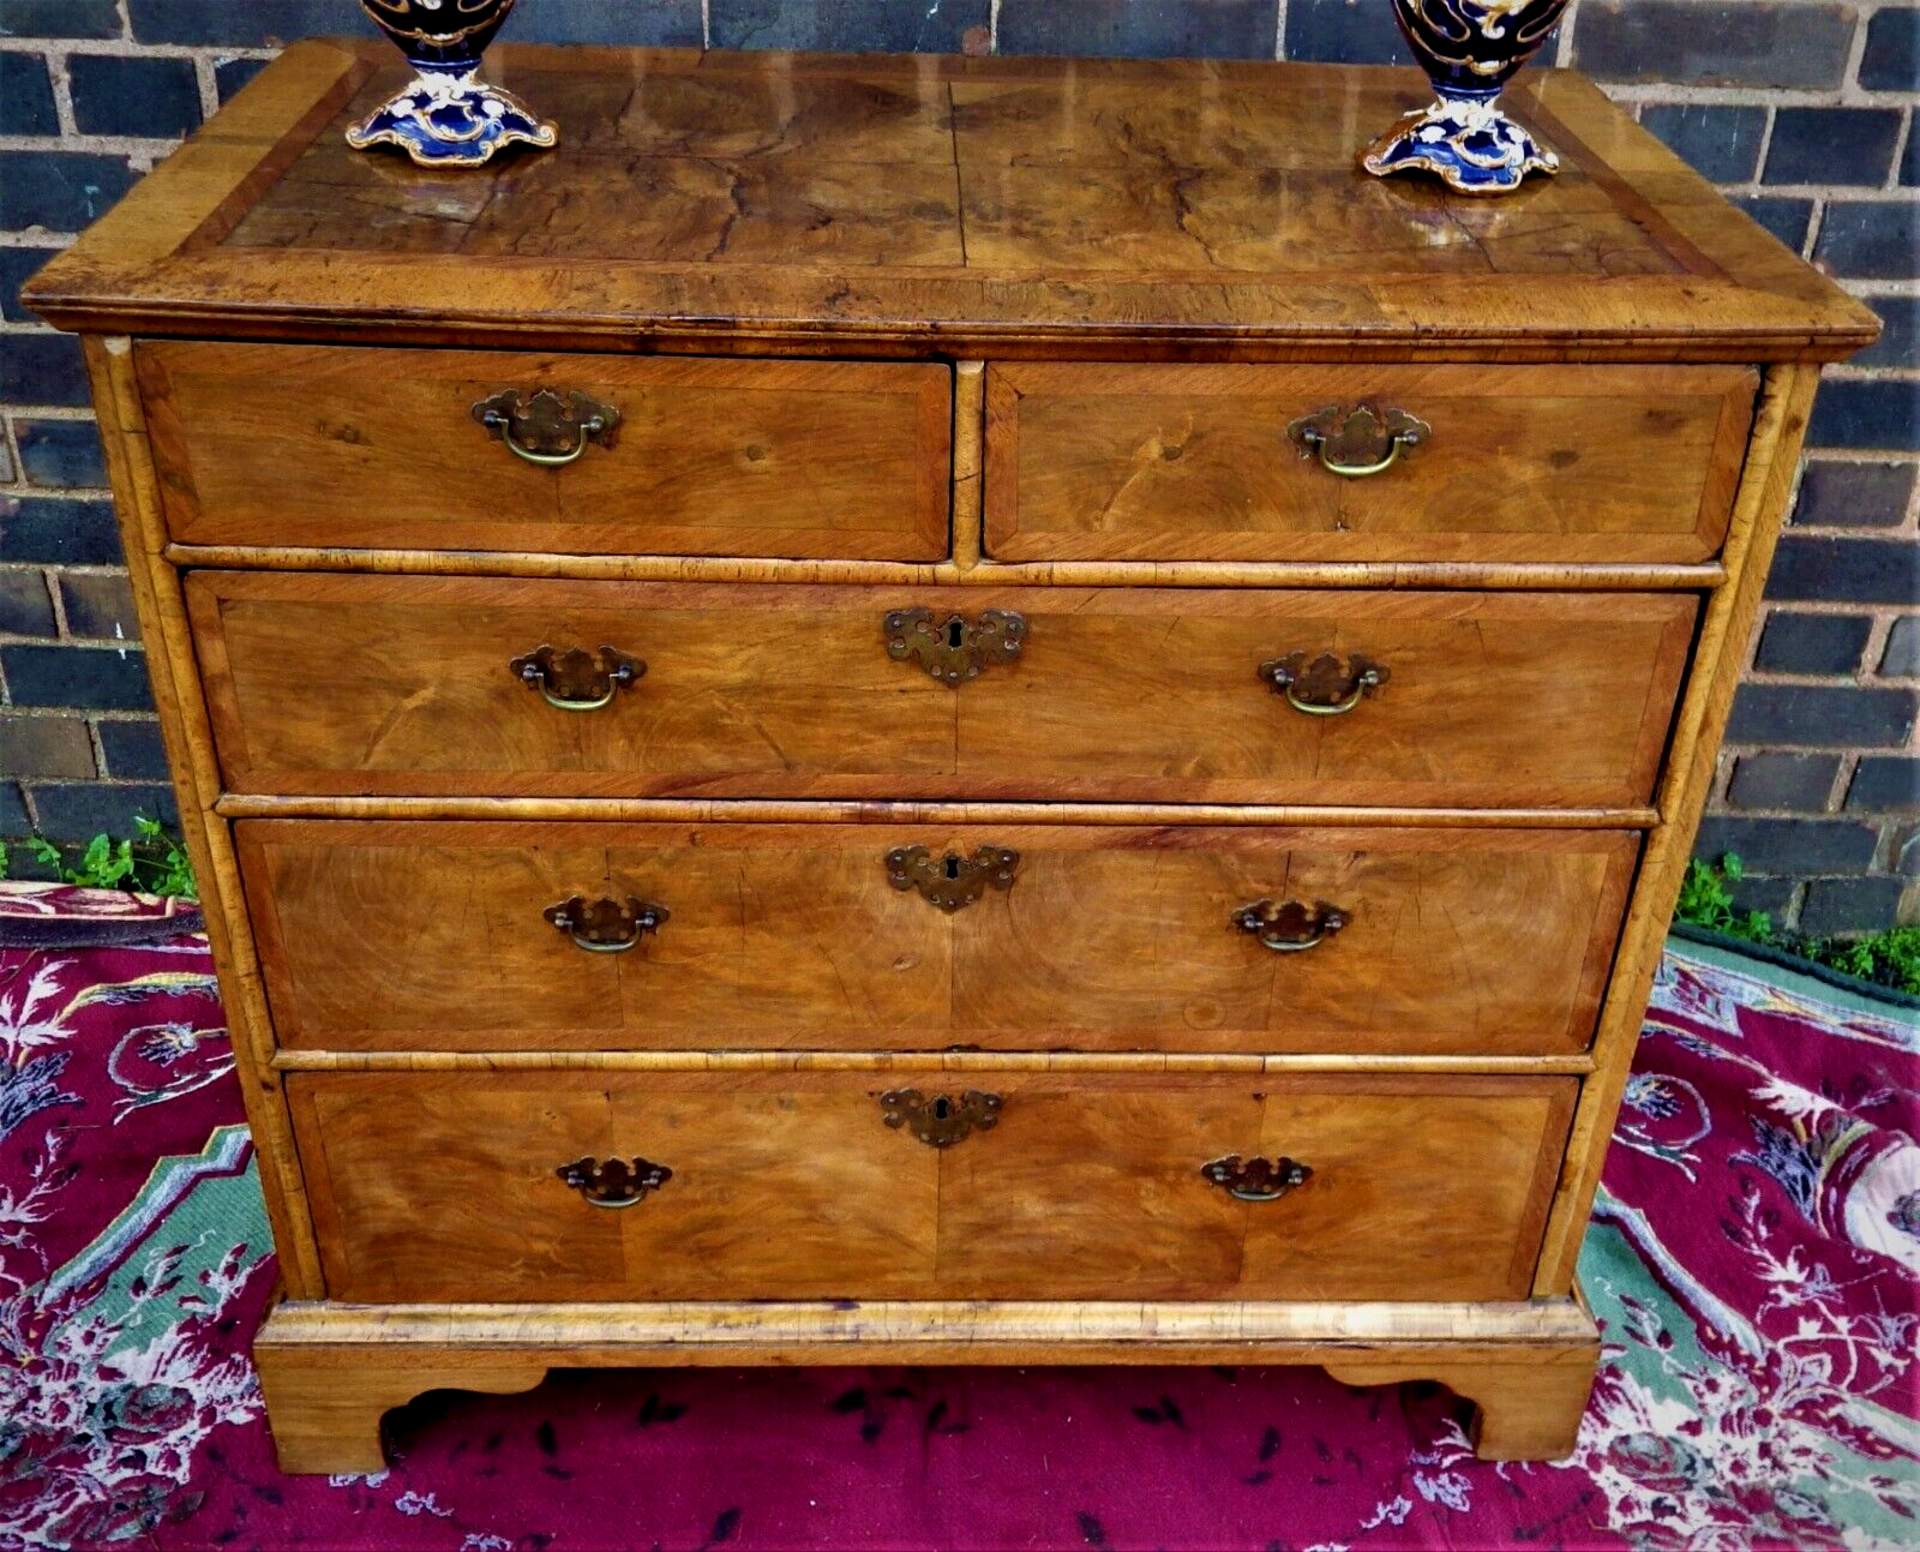 George I Walnut Chest Of Drawers Of Small Proportions Circa 1720 The Quarter Veneered And Cross-